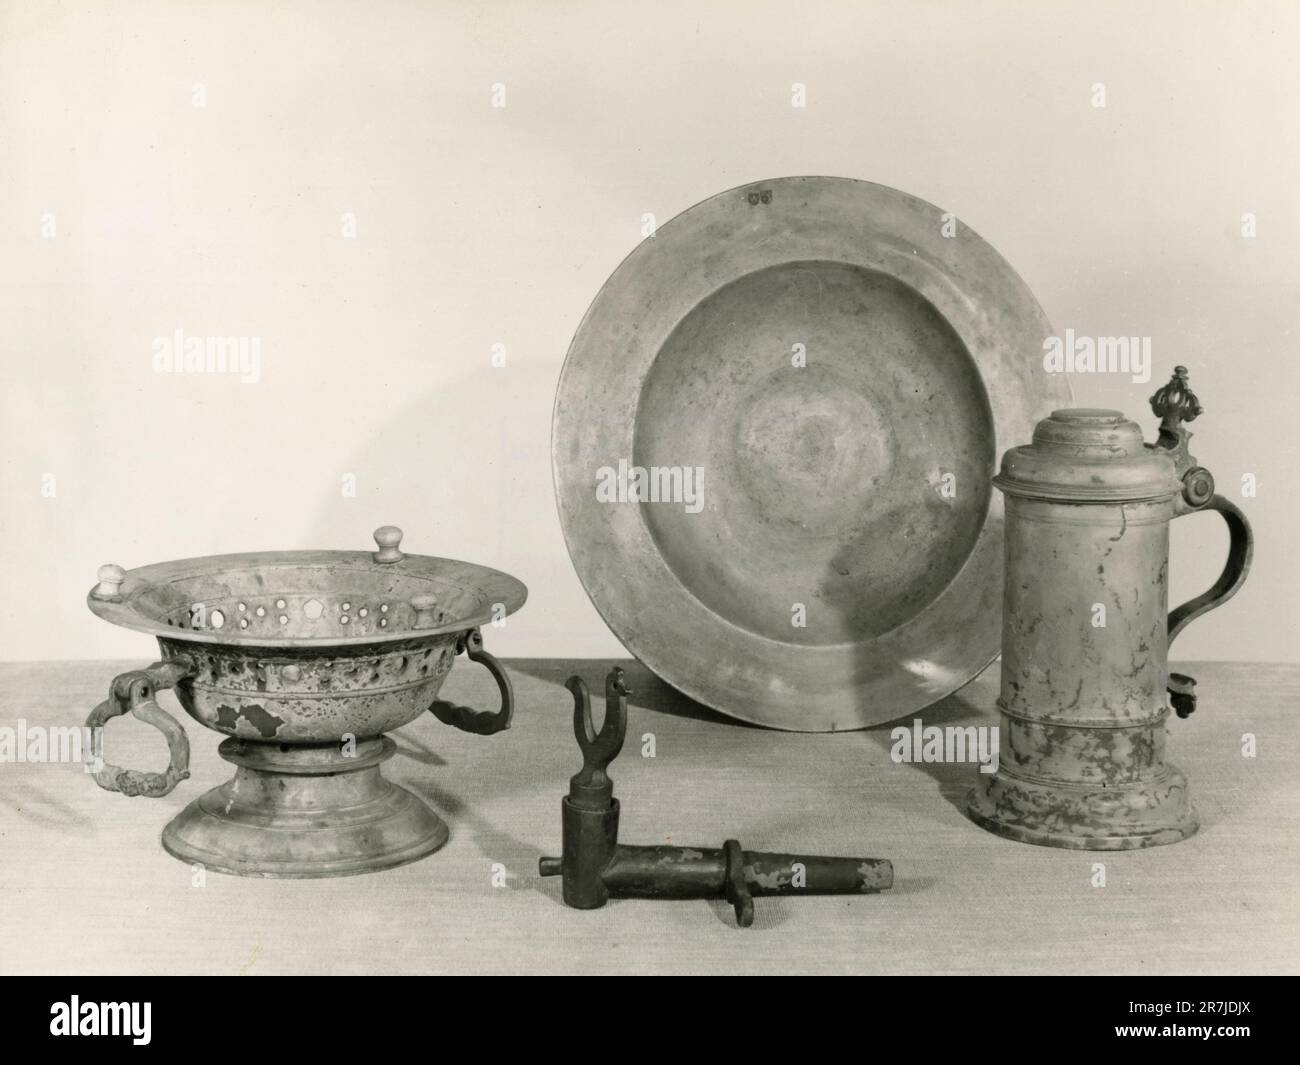 Bronze brazier and pewter tankard found onboard the Viking ship Wasa, Sweden 1960s Stock Photo